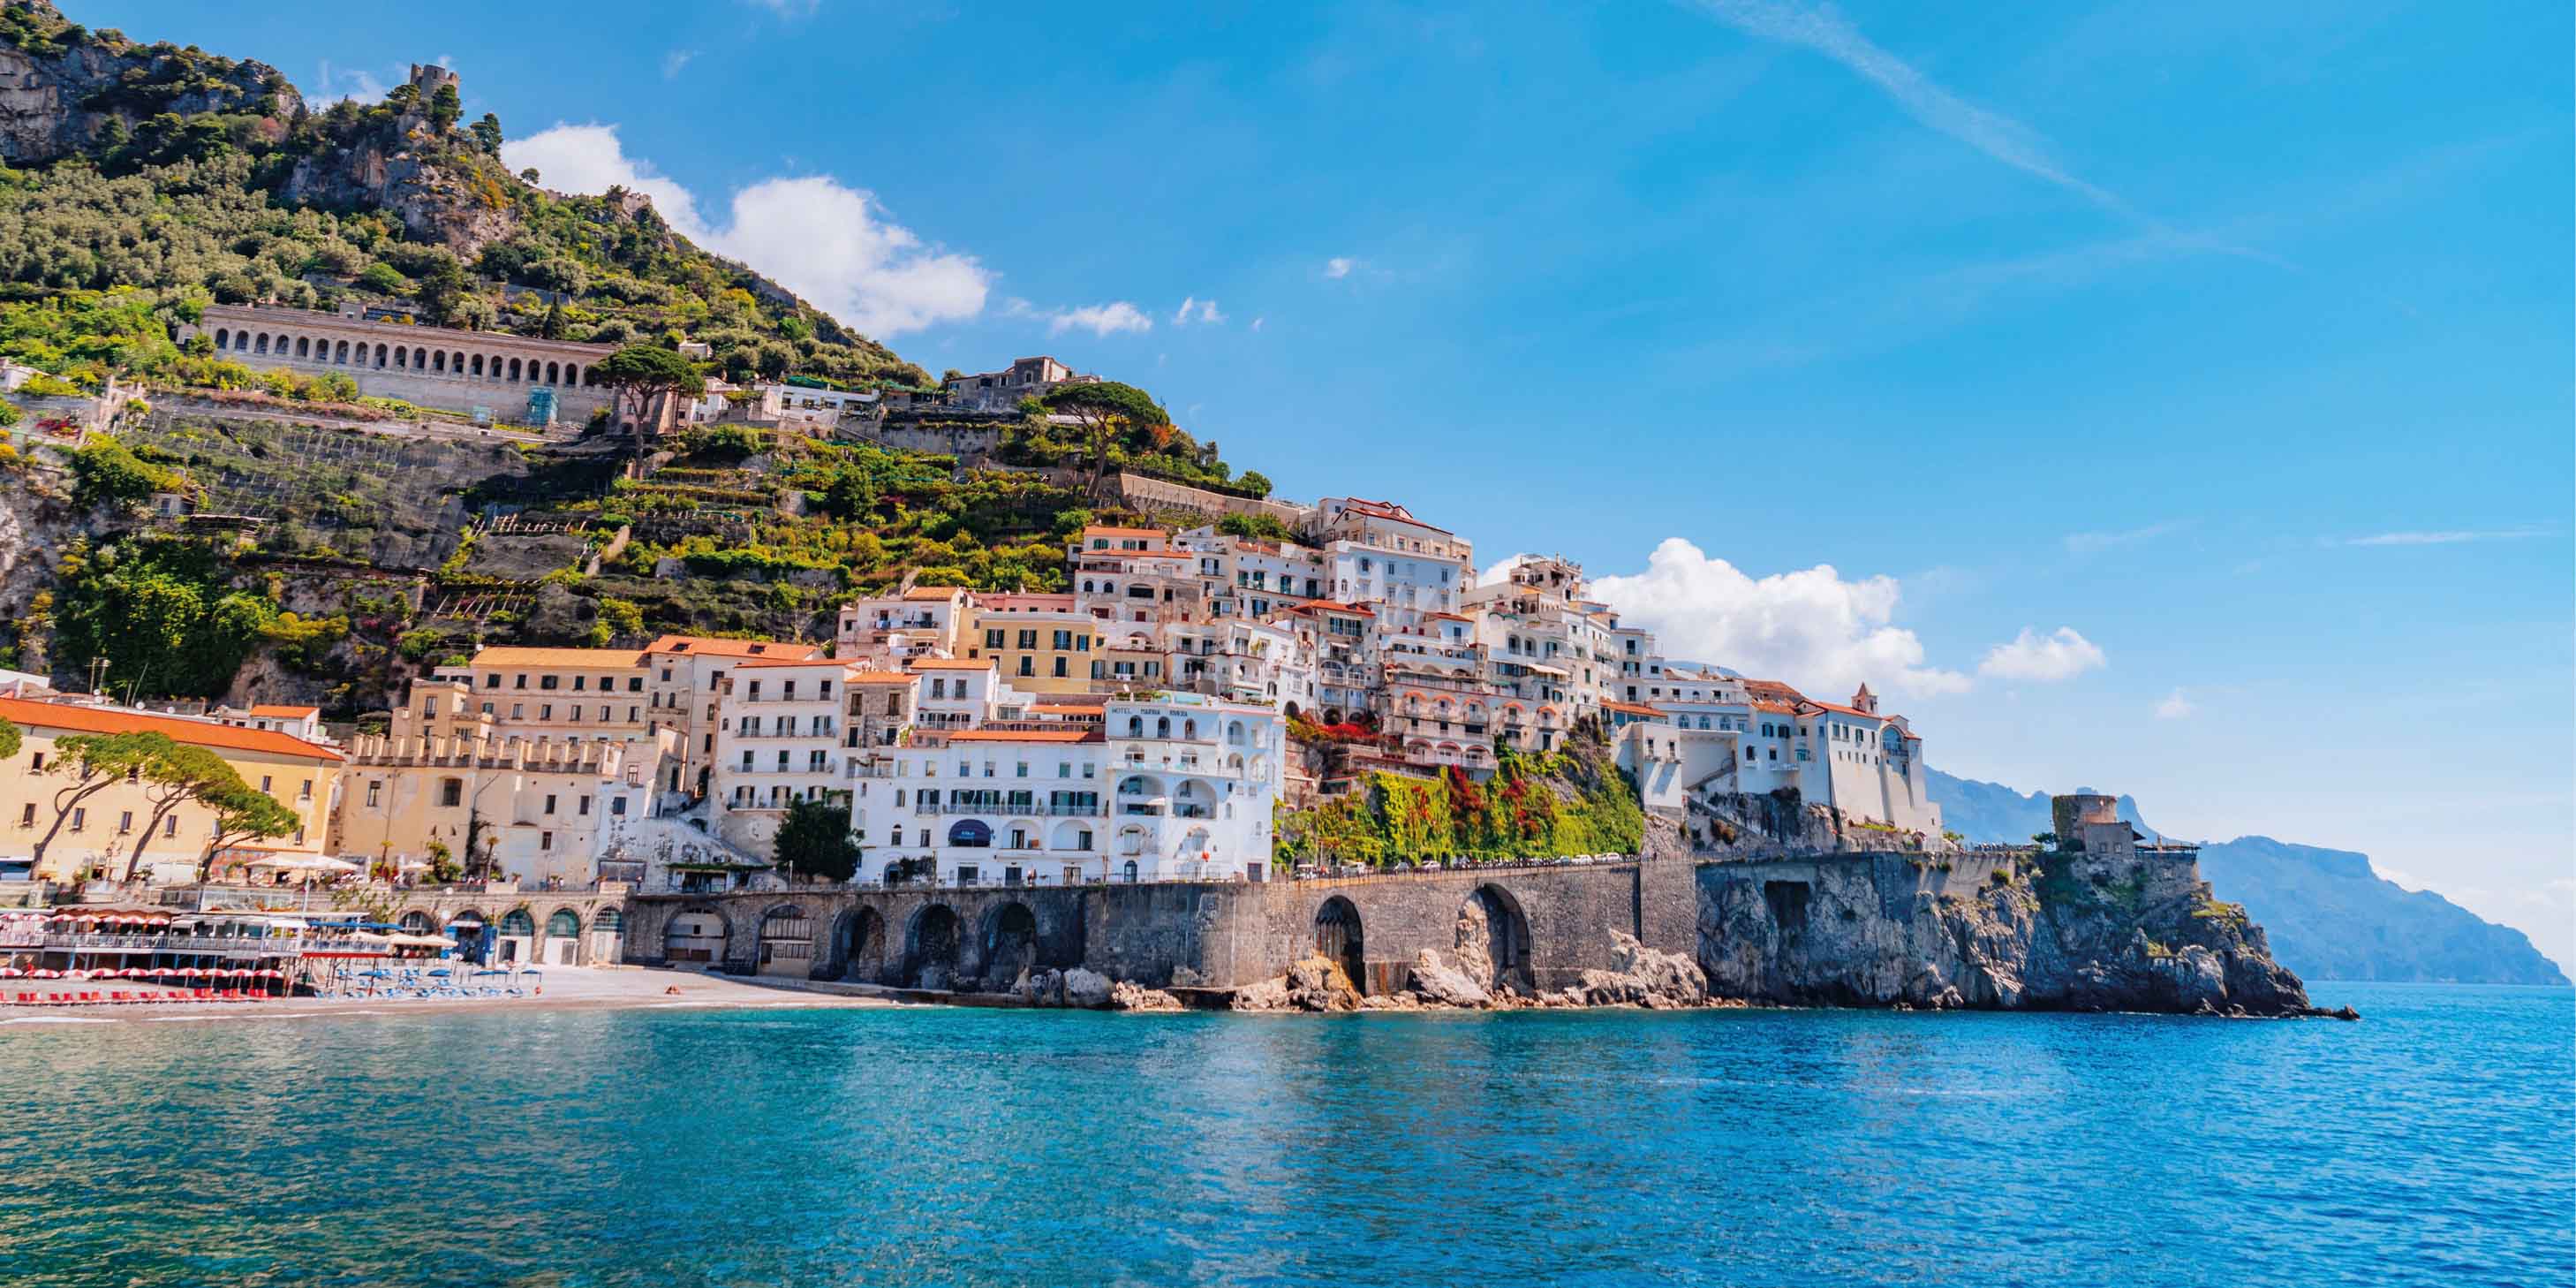 The stunning coastline of the Amalfi Coast, with traditional houses built up against the cliff edge